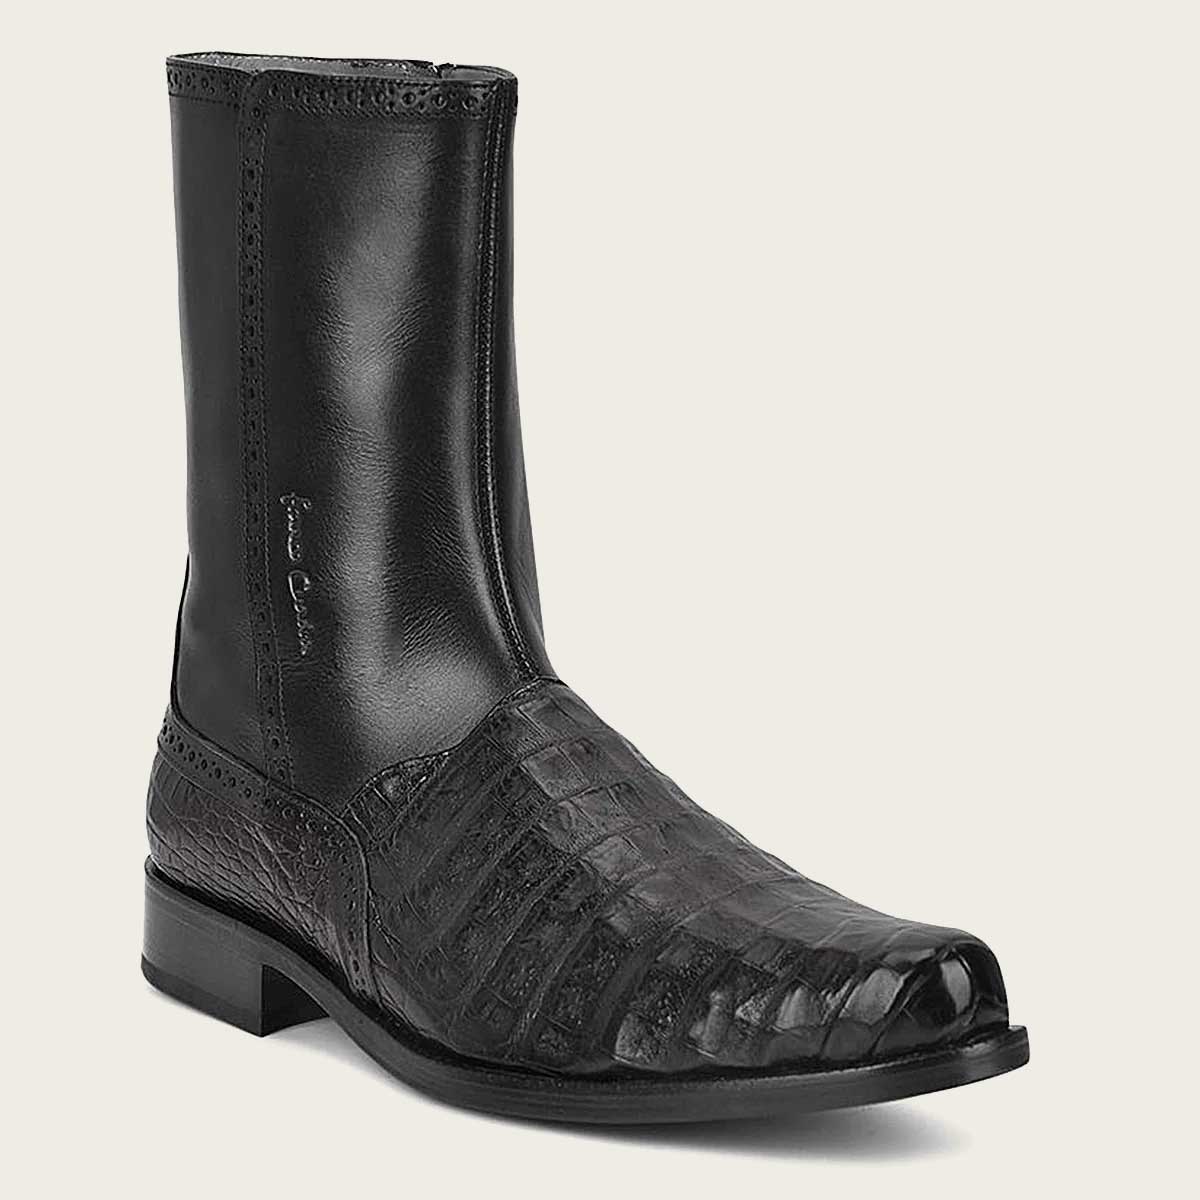 Exotic black leather boot, hand-painted for a one-of-a-kind style statement.